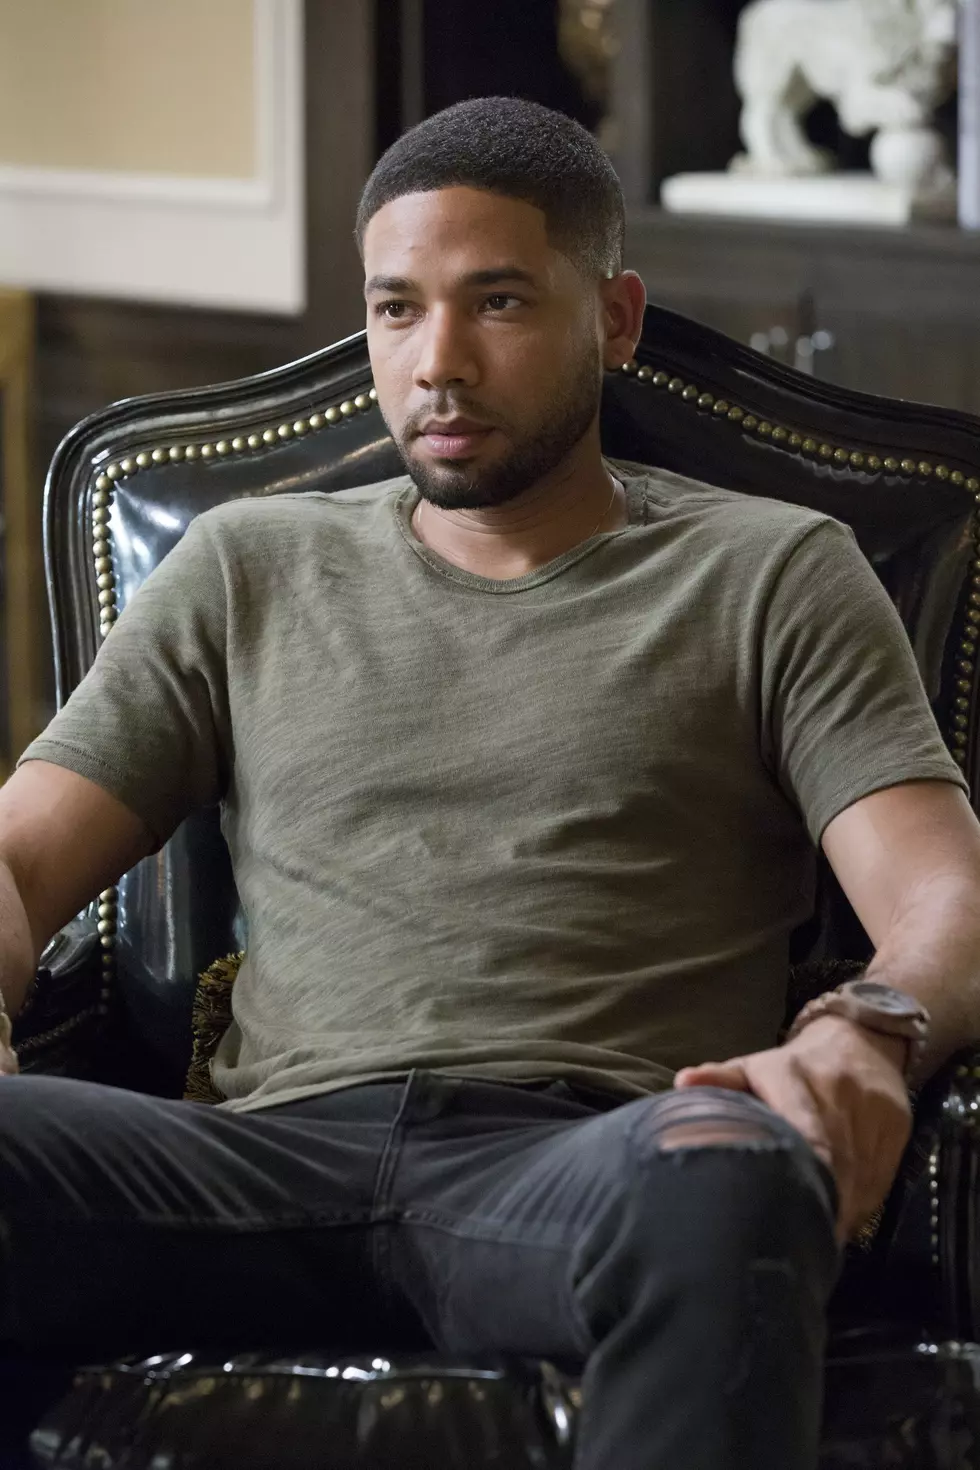 Jussie Smollett Is Now A Suspect For Reportedly Filing A False Police Report